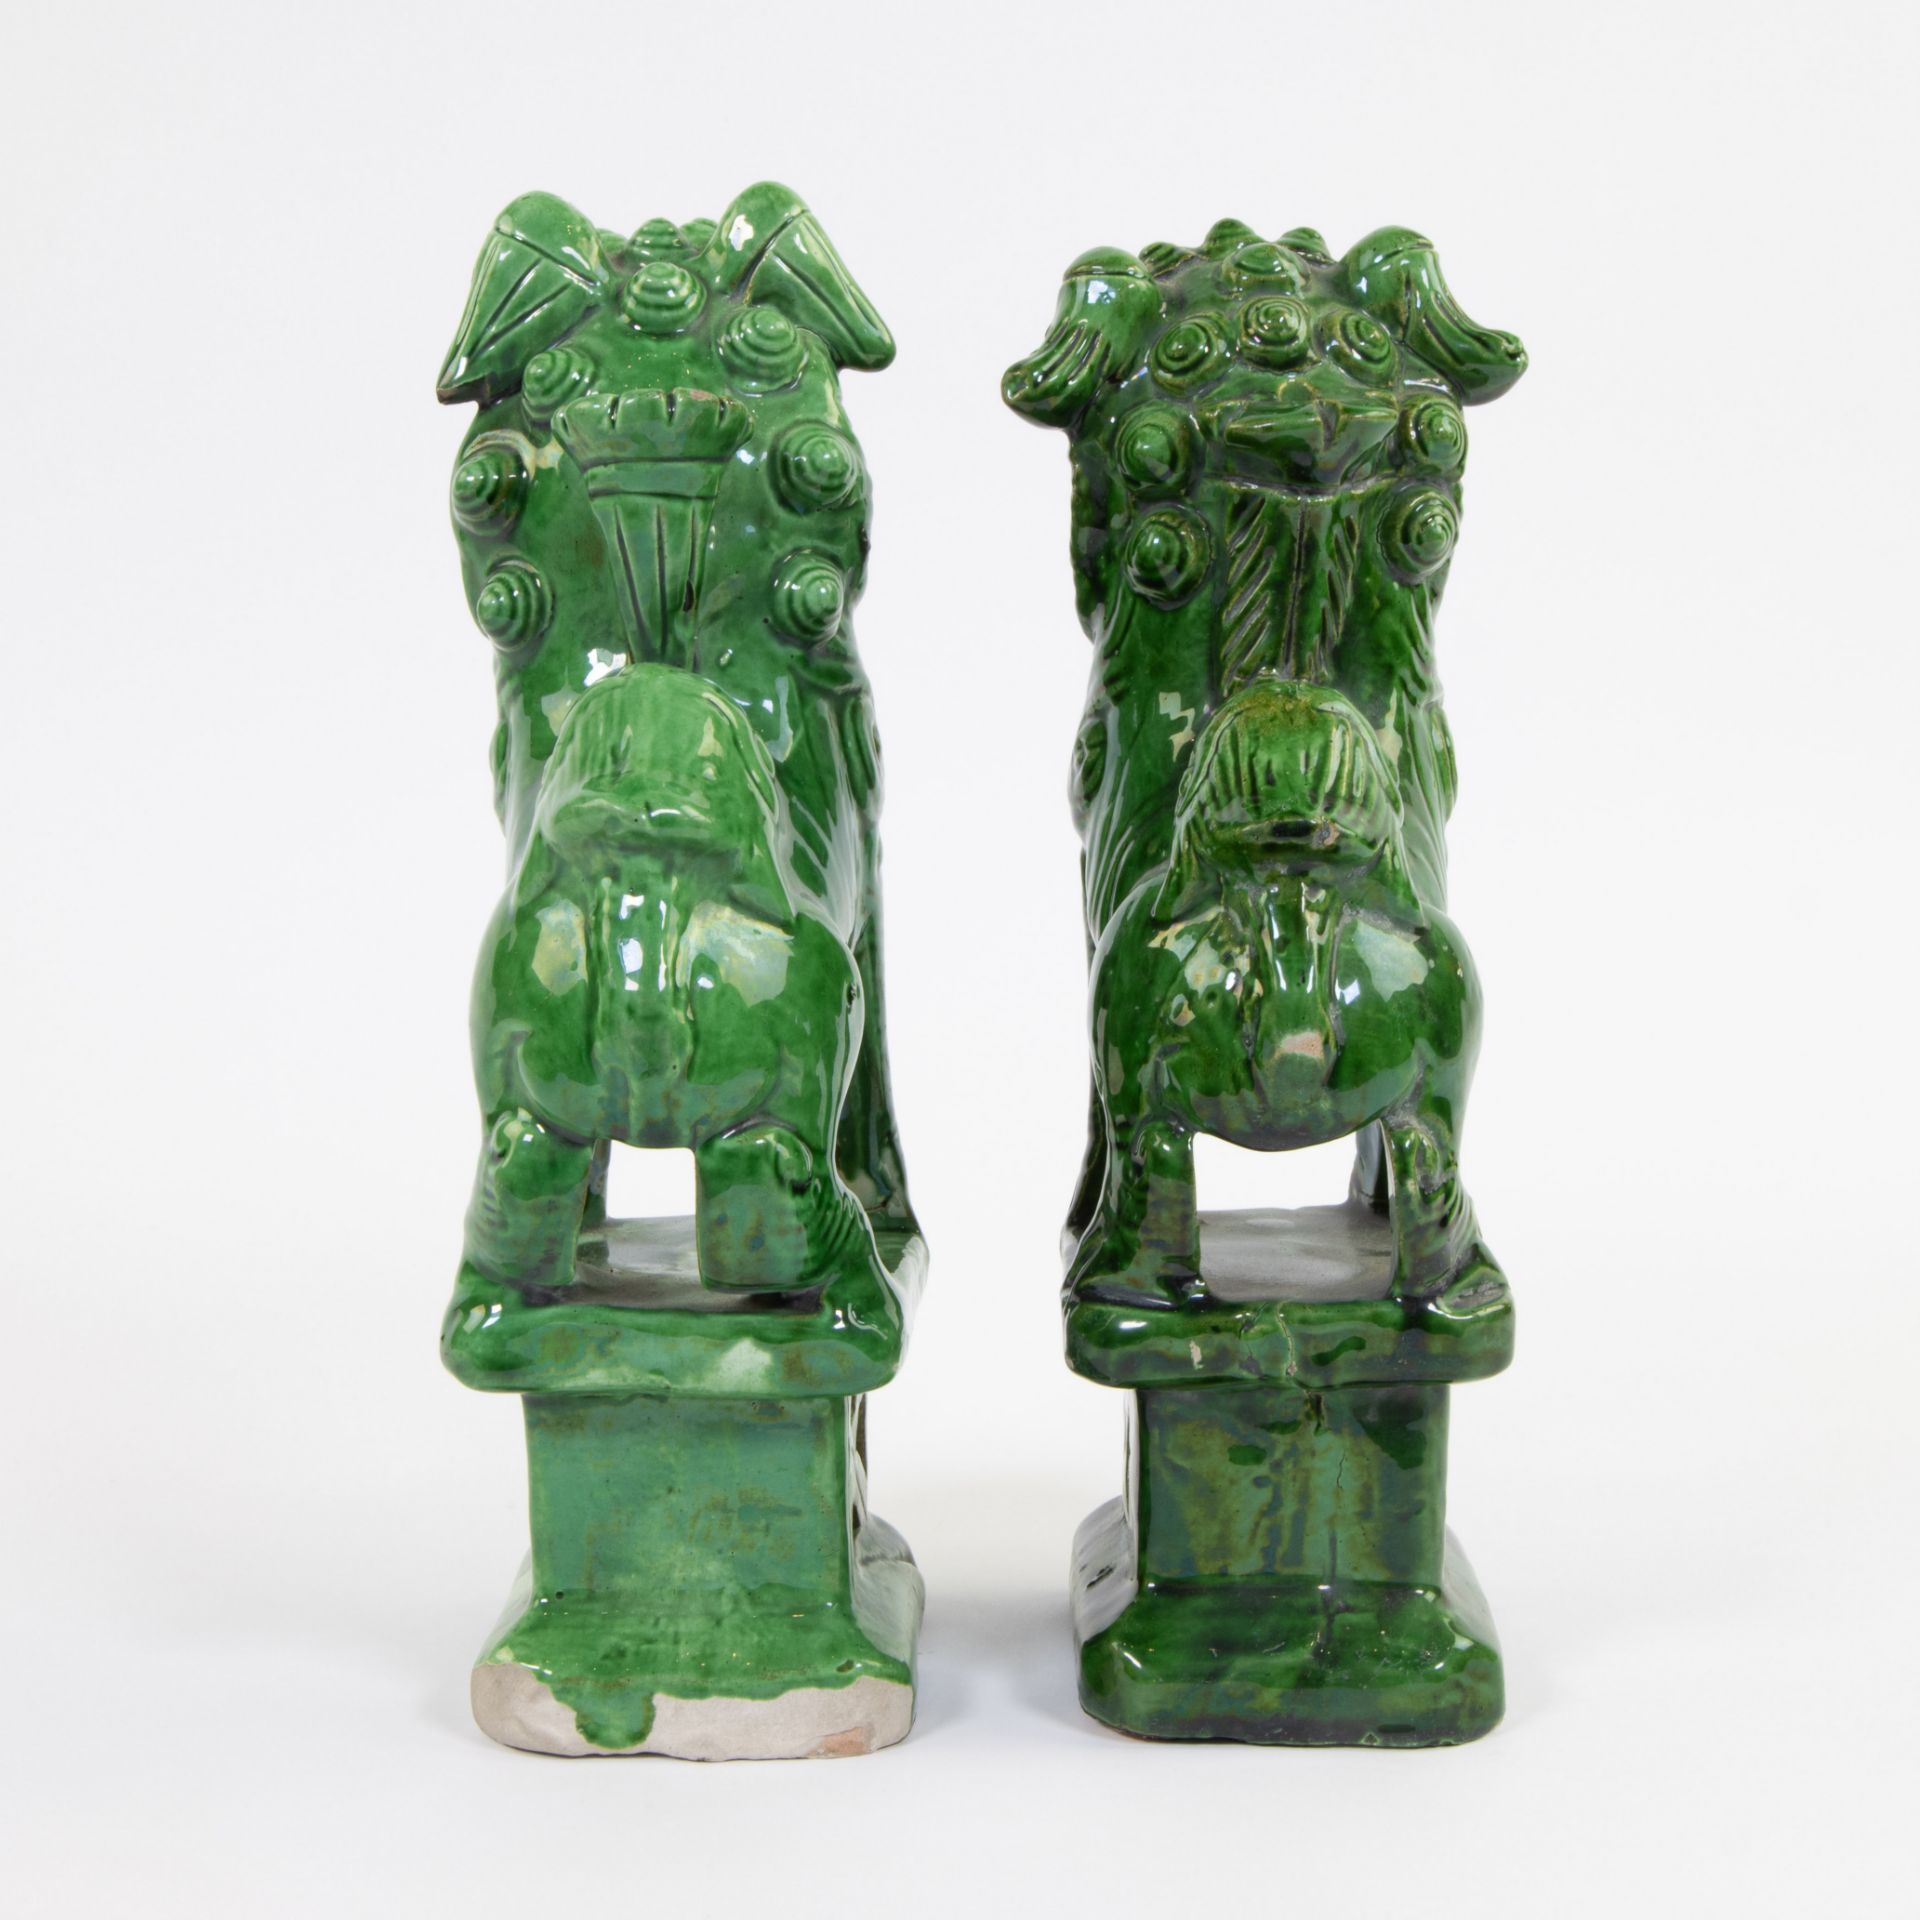 Collection of 2 green glazed ceramic Pho dogs - Image 3 of 5